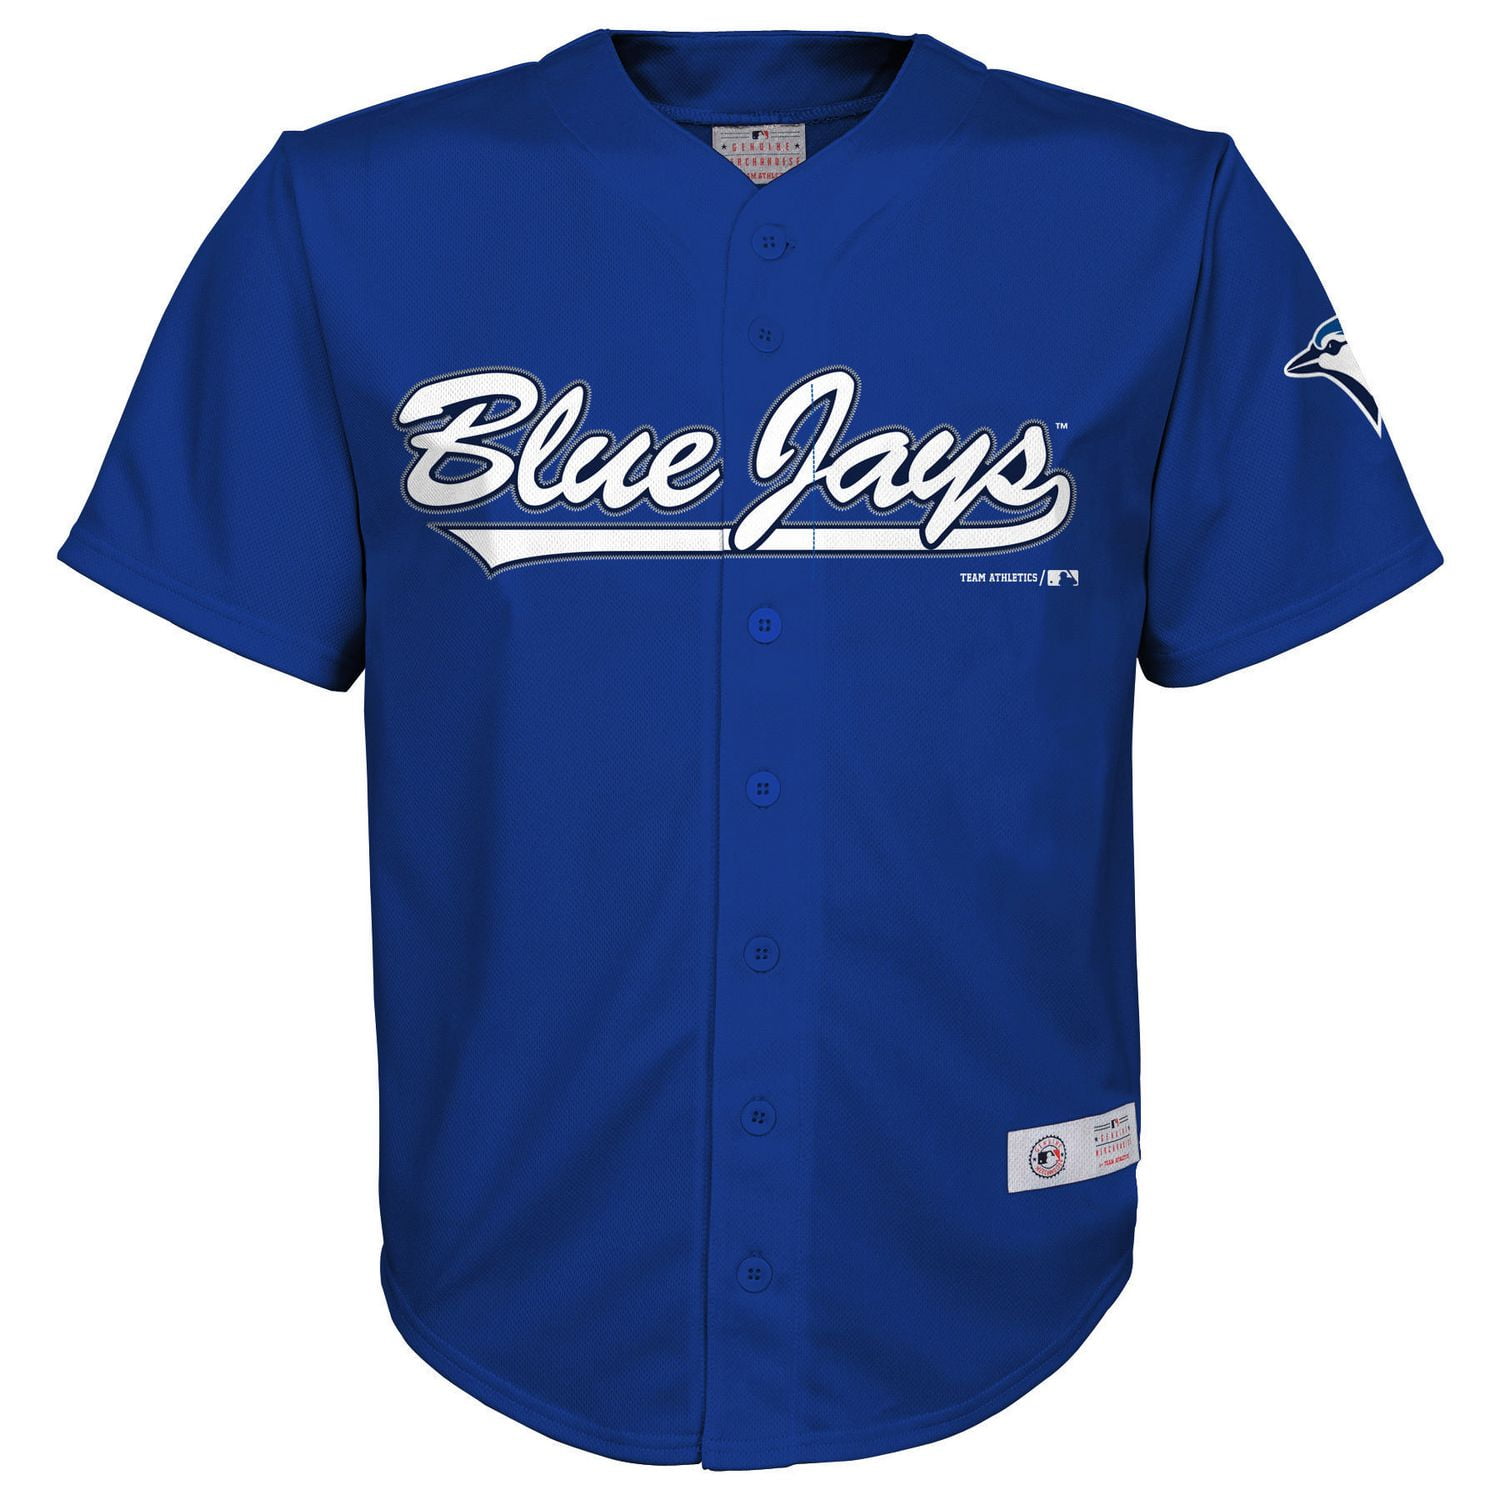 Toronto Blue Jays fans can get a new jersey at this pop up